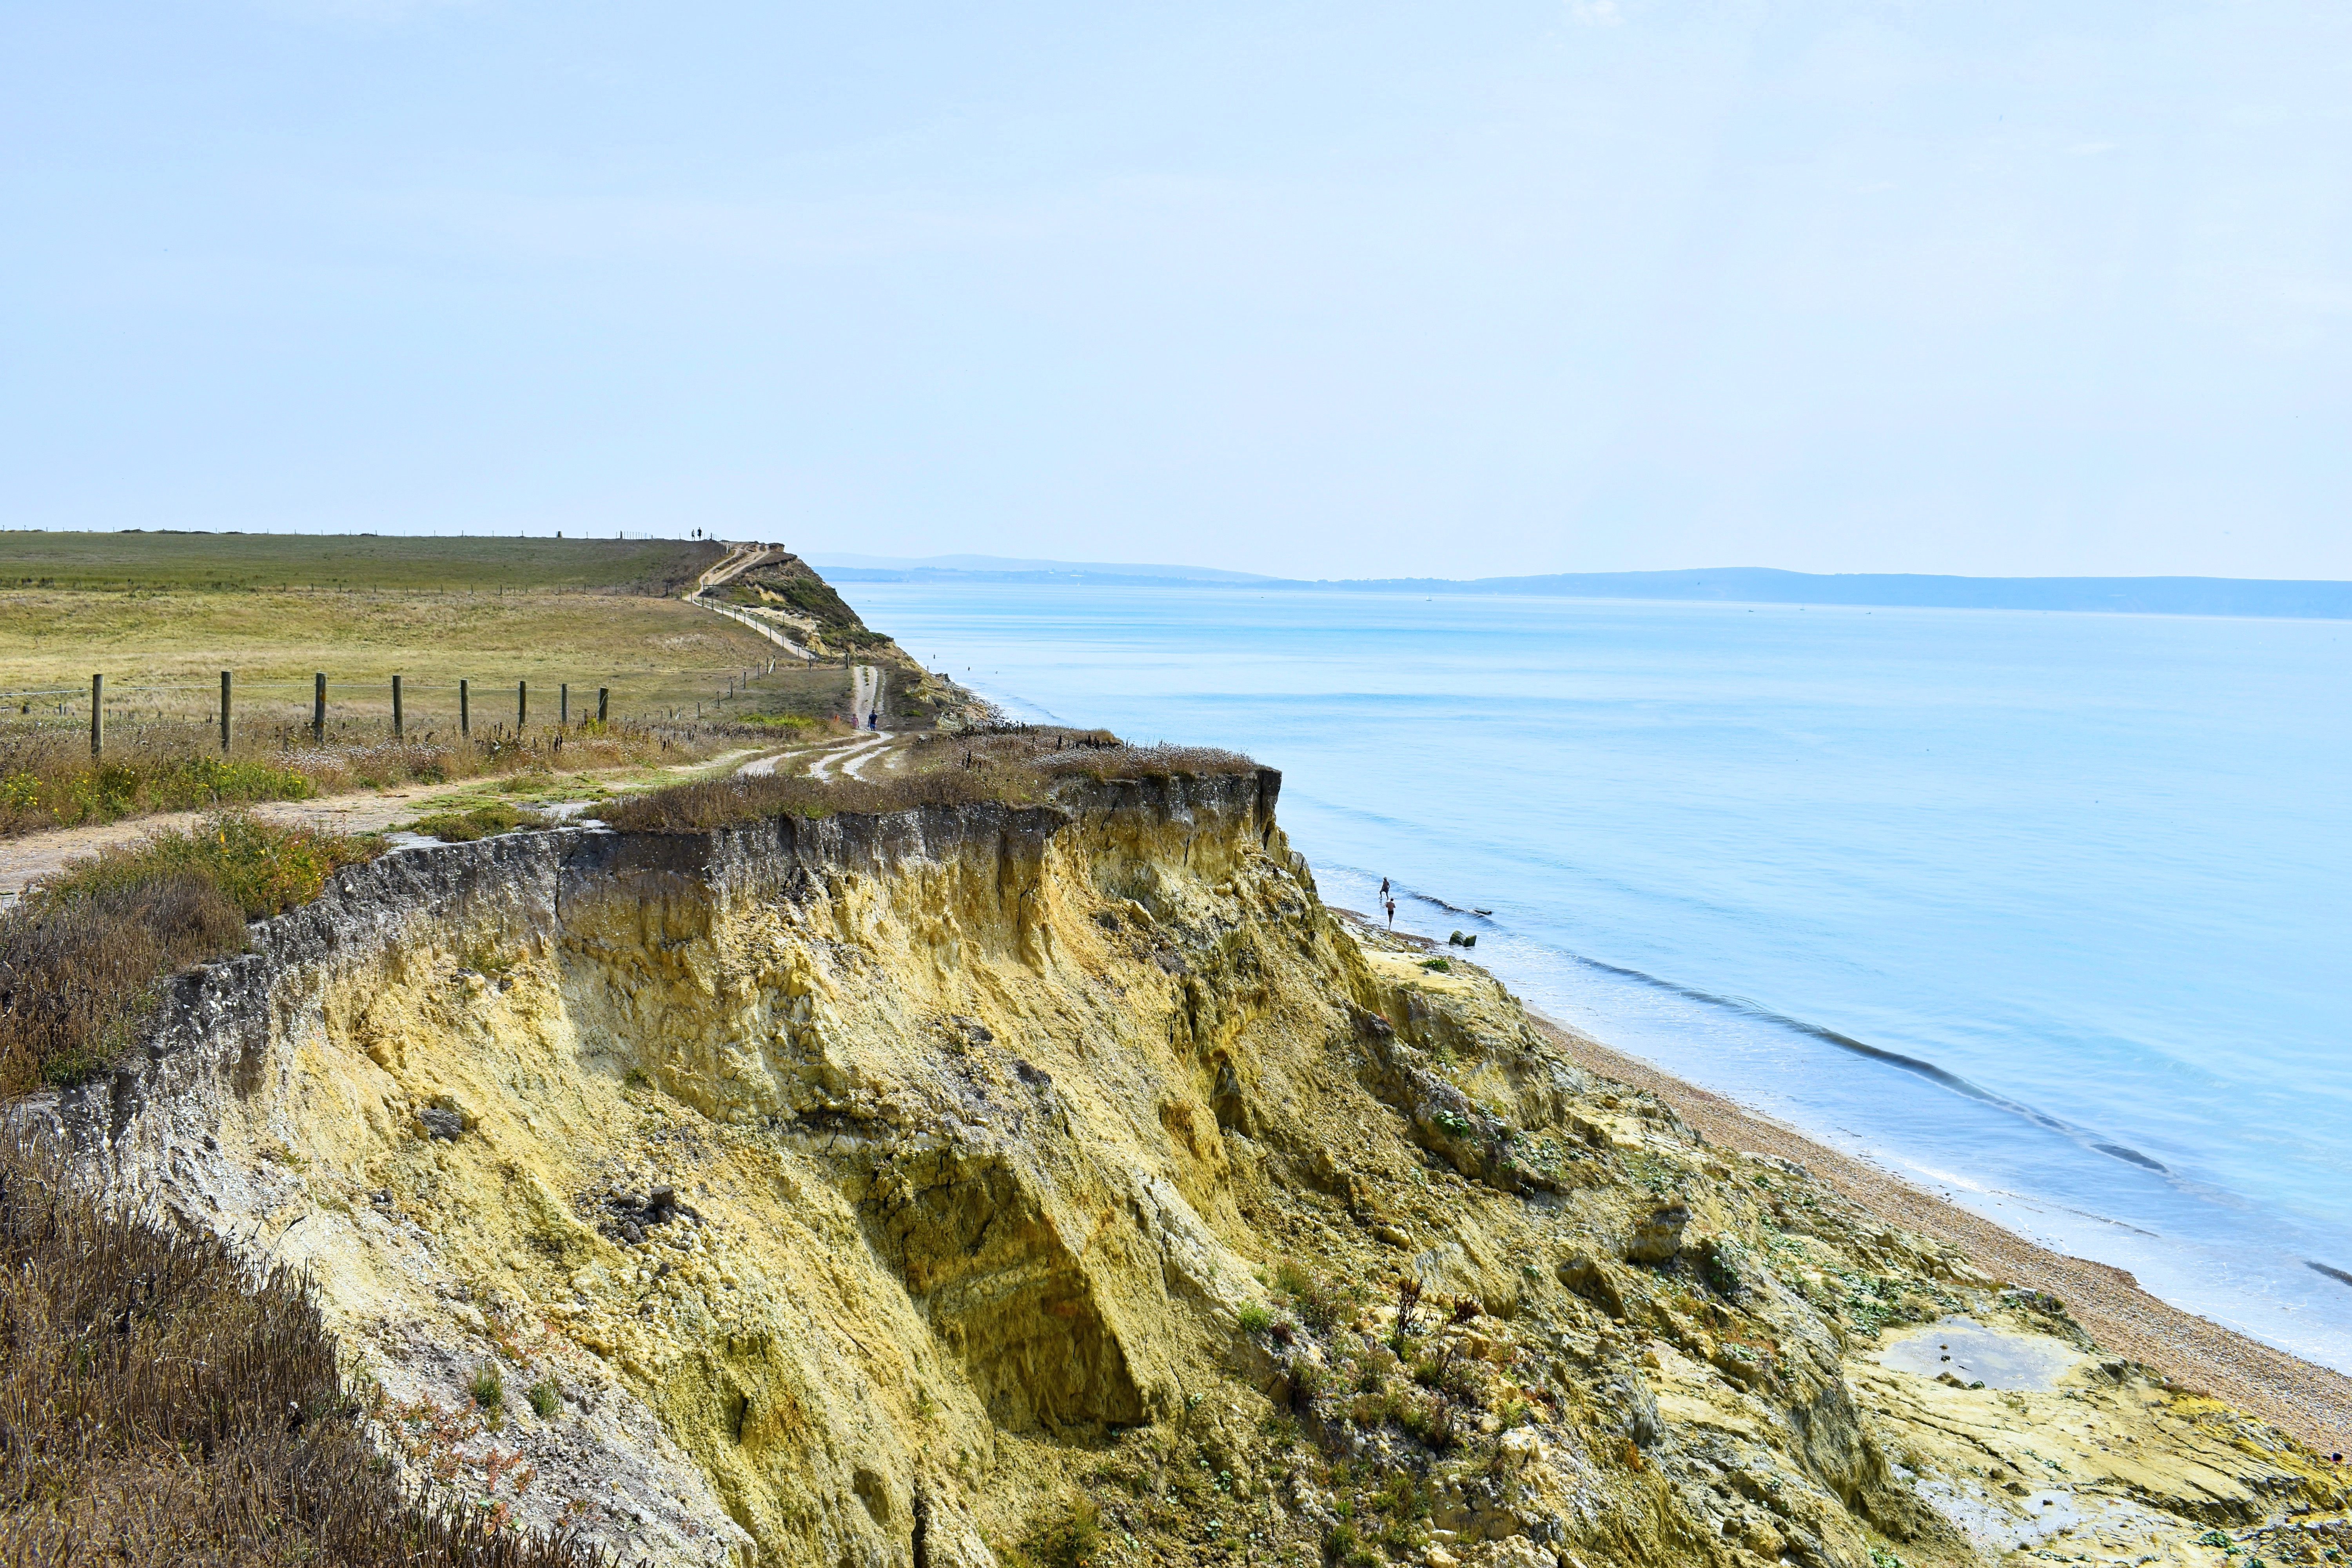 Figure 3.
Erosion cuts into old footpaths. 
Route from Barton on Sea to Hurst Spit. Image taken by Isobel Akerman, 2020